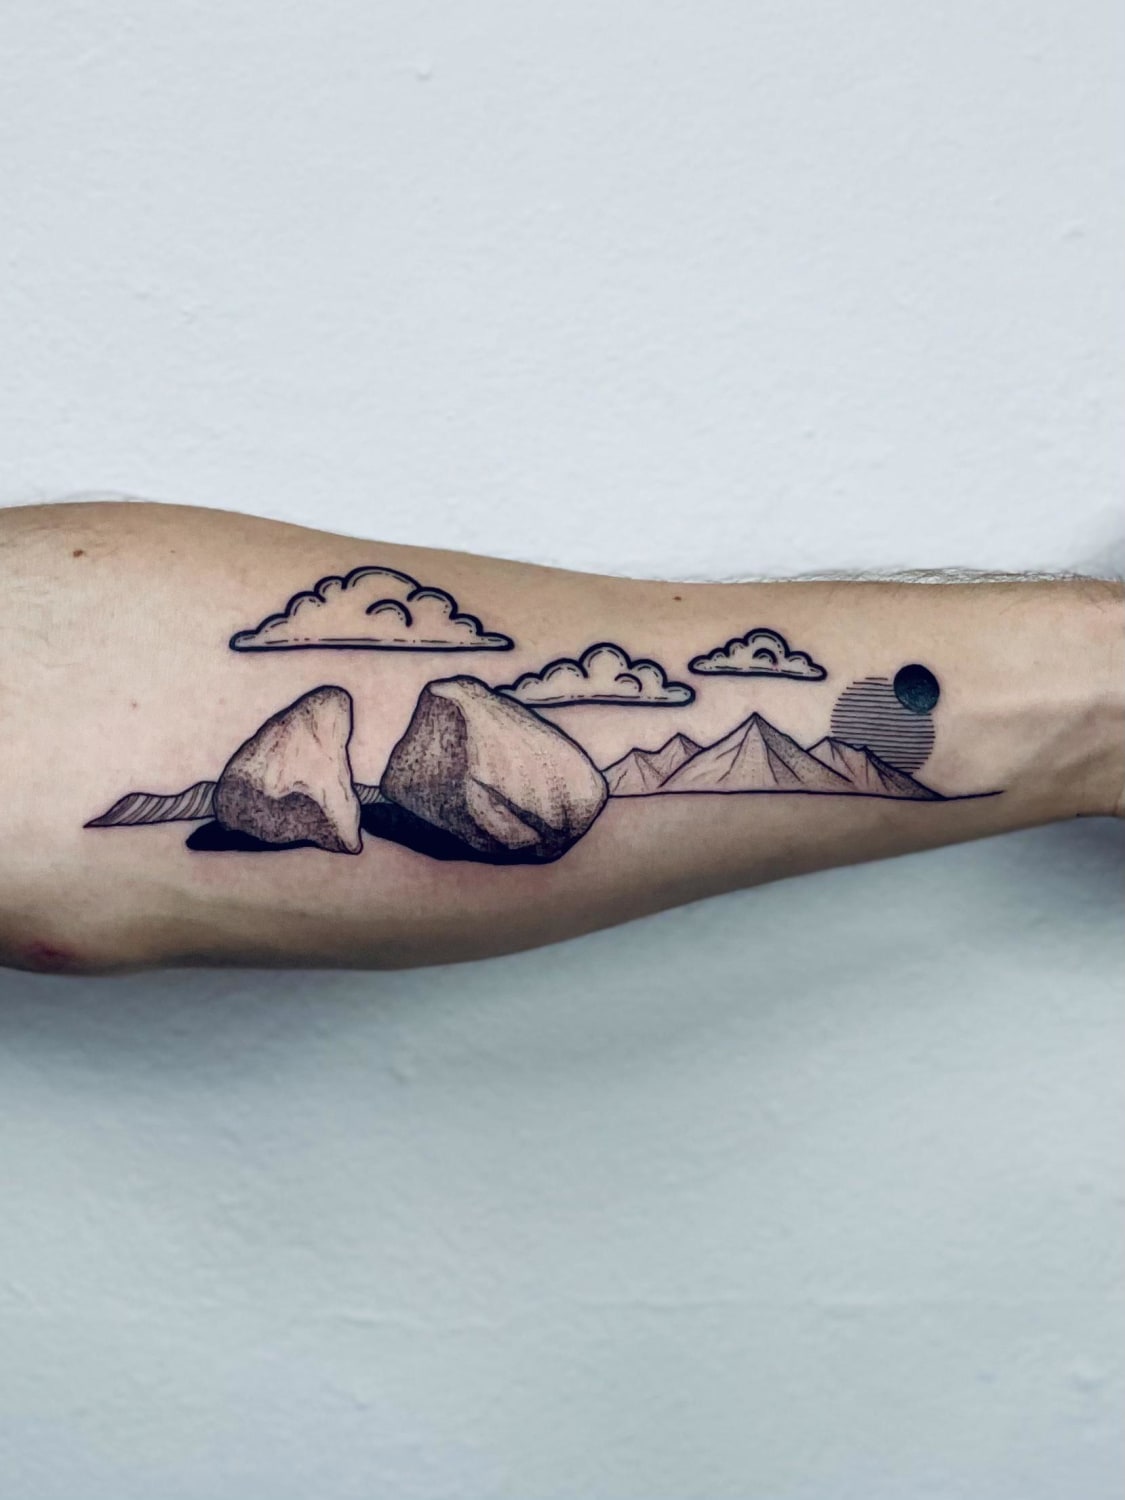 My favorite place for my first tattoo.